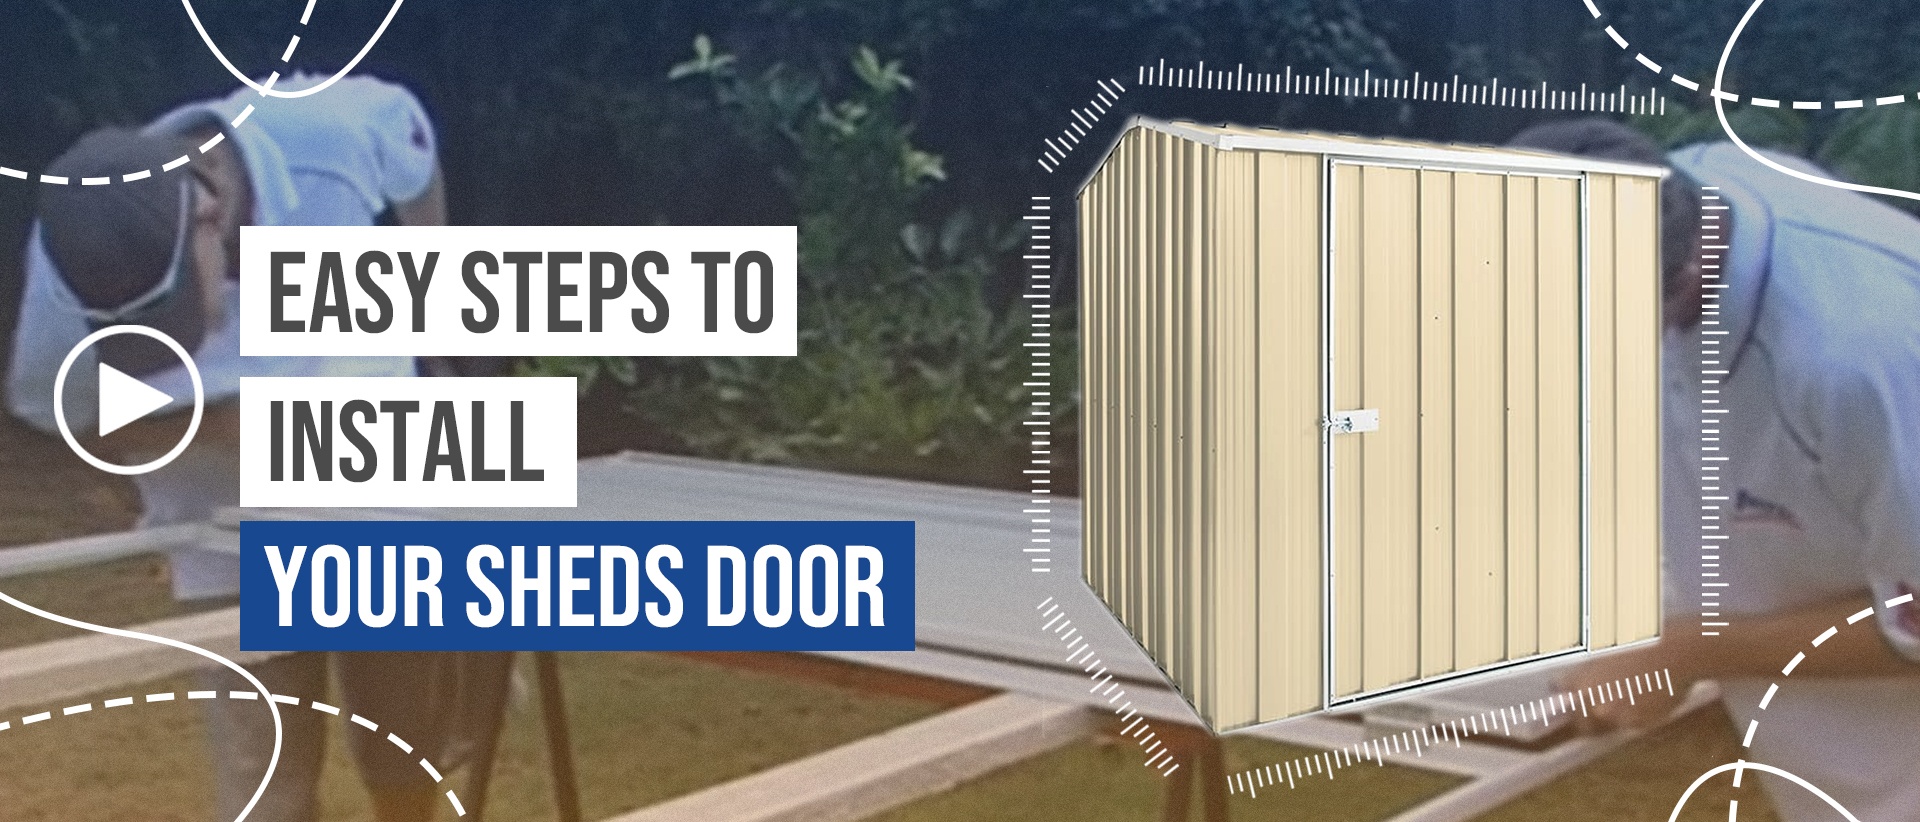 easy-steps-to-install-your-sheds-door-banner